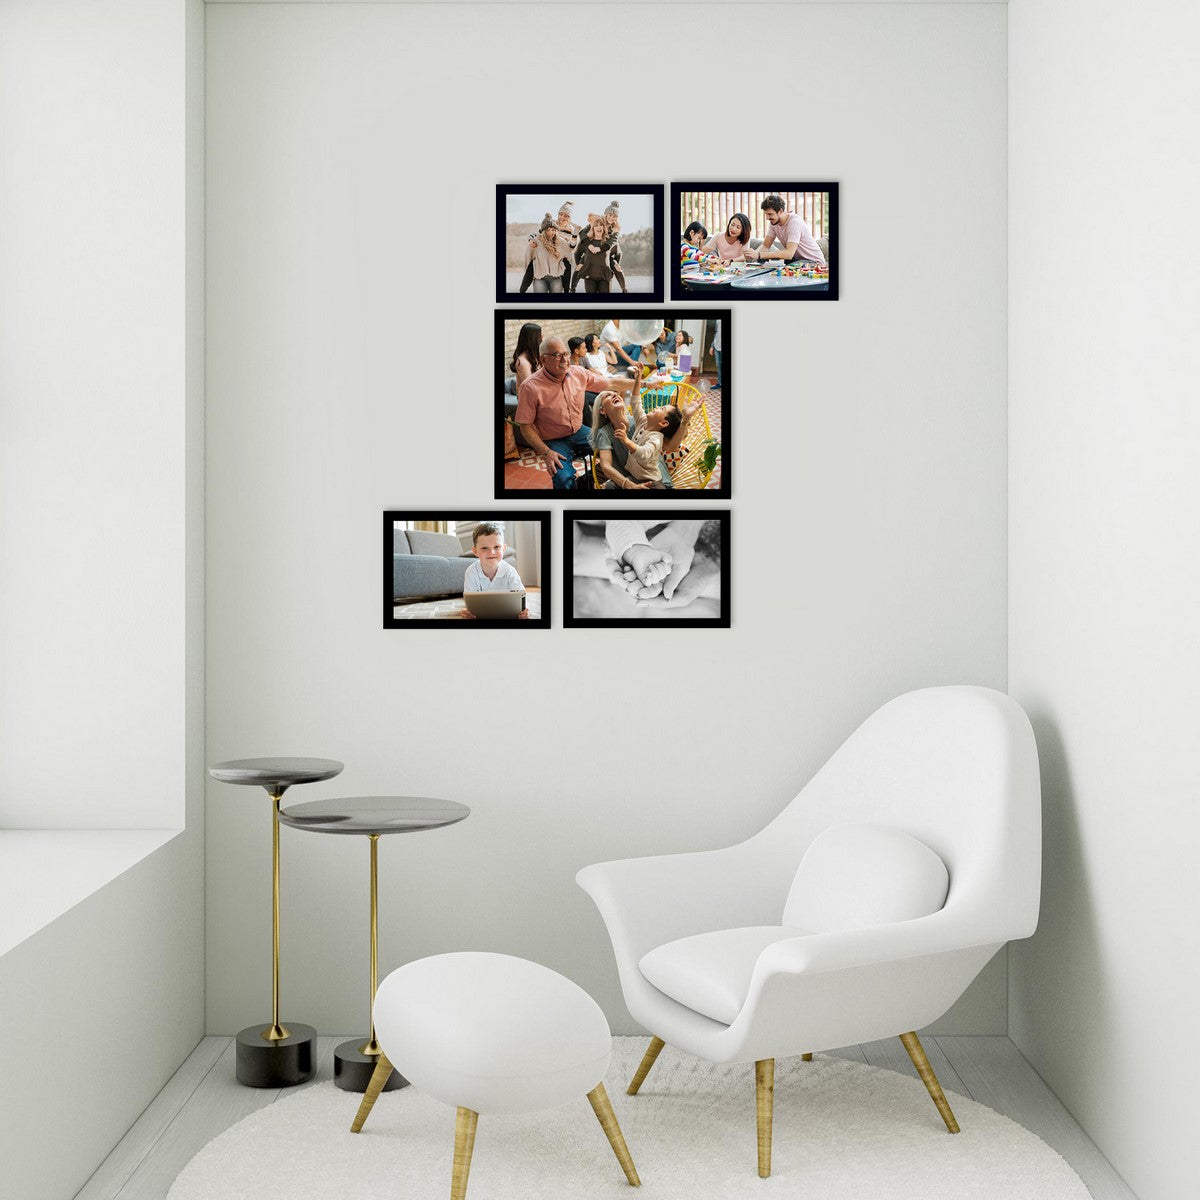 Memory Wall Collage Photo Frame - Set of 5 Photo Frames for 4 Photos of 5"x7", 1 Photos of 8"x10" 2